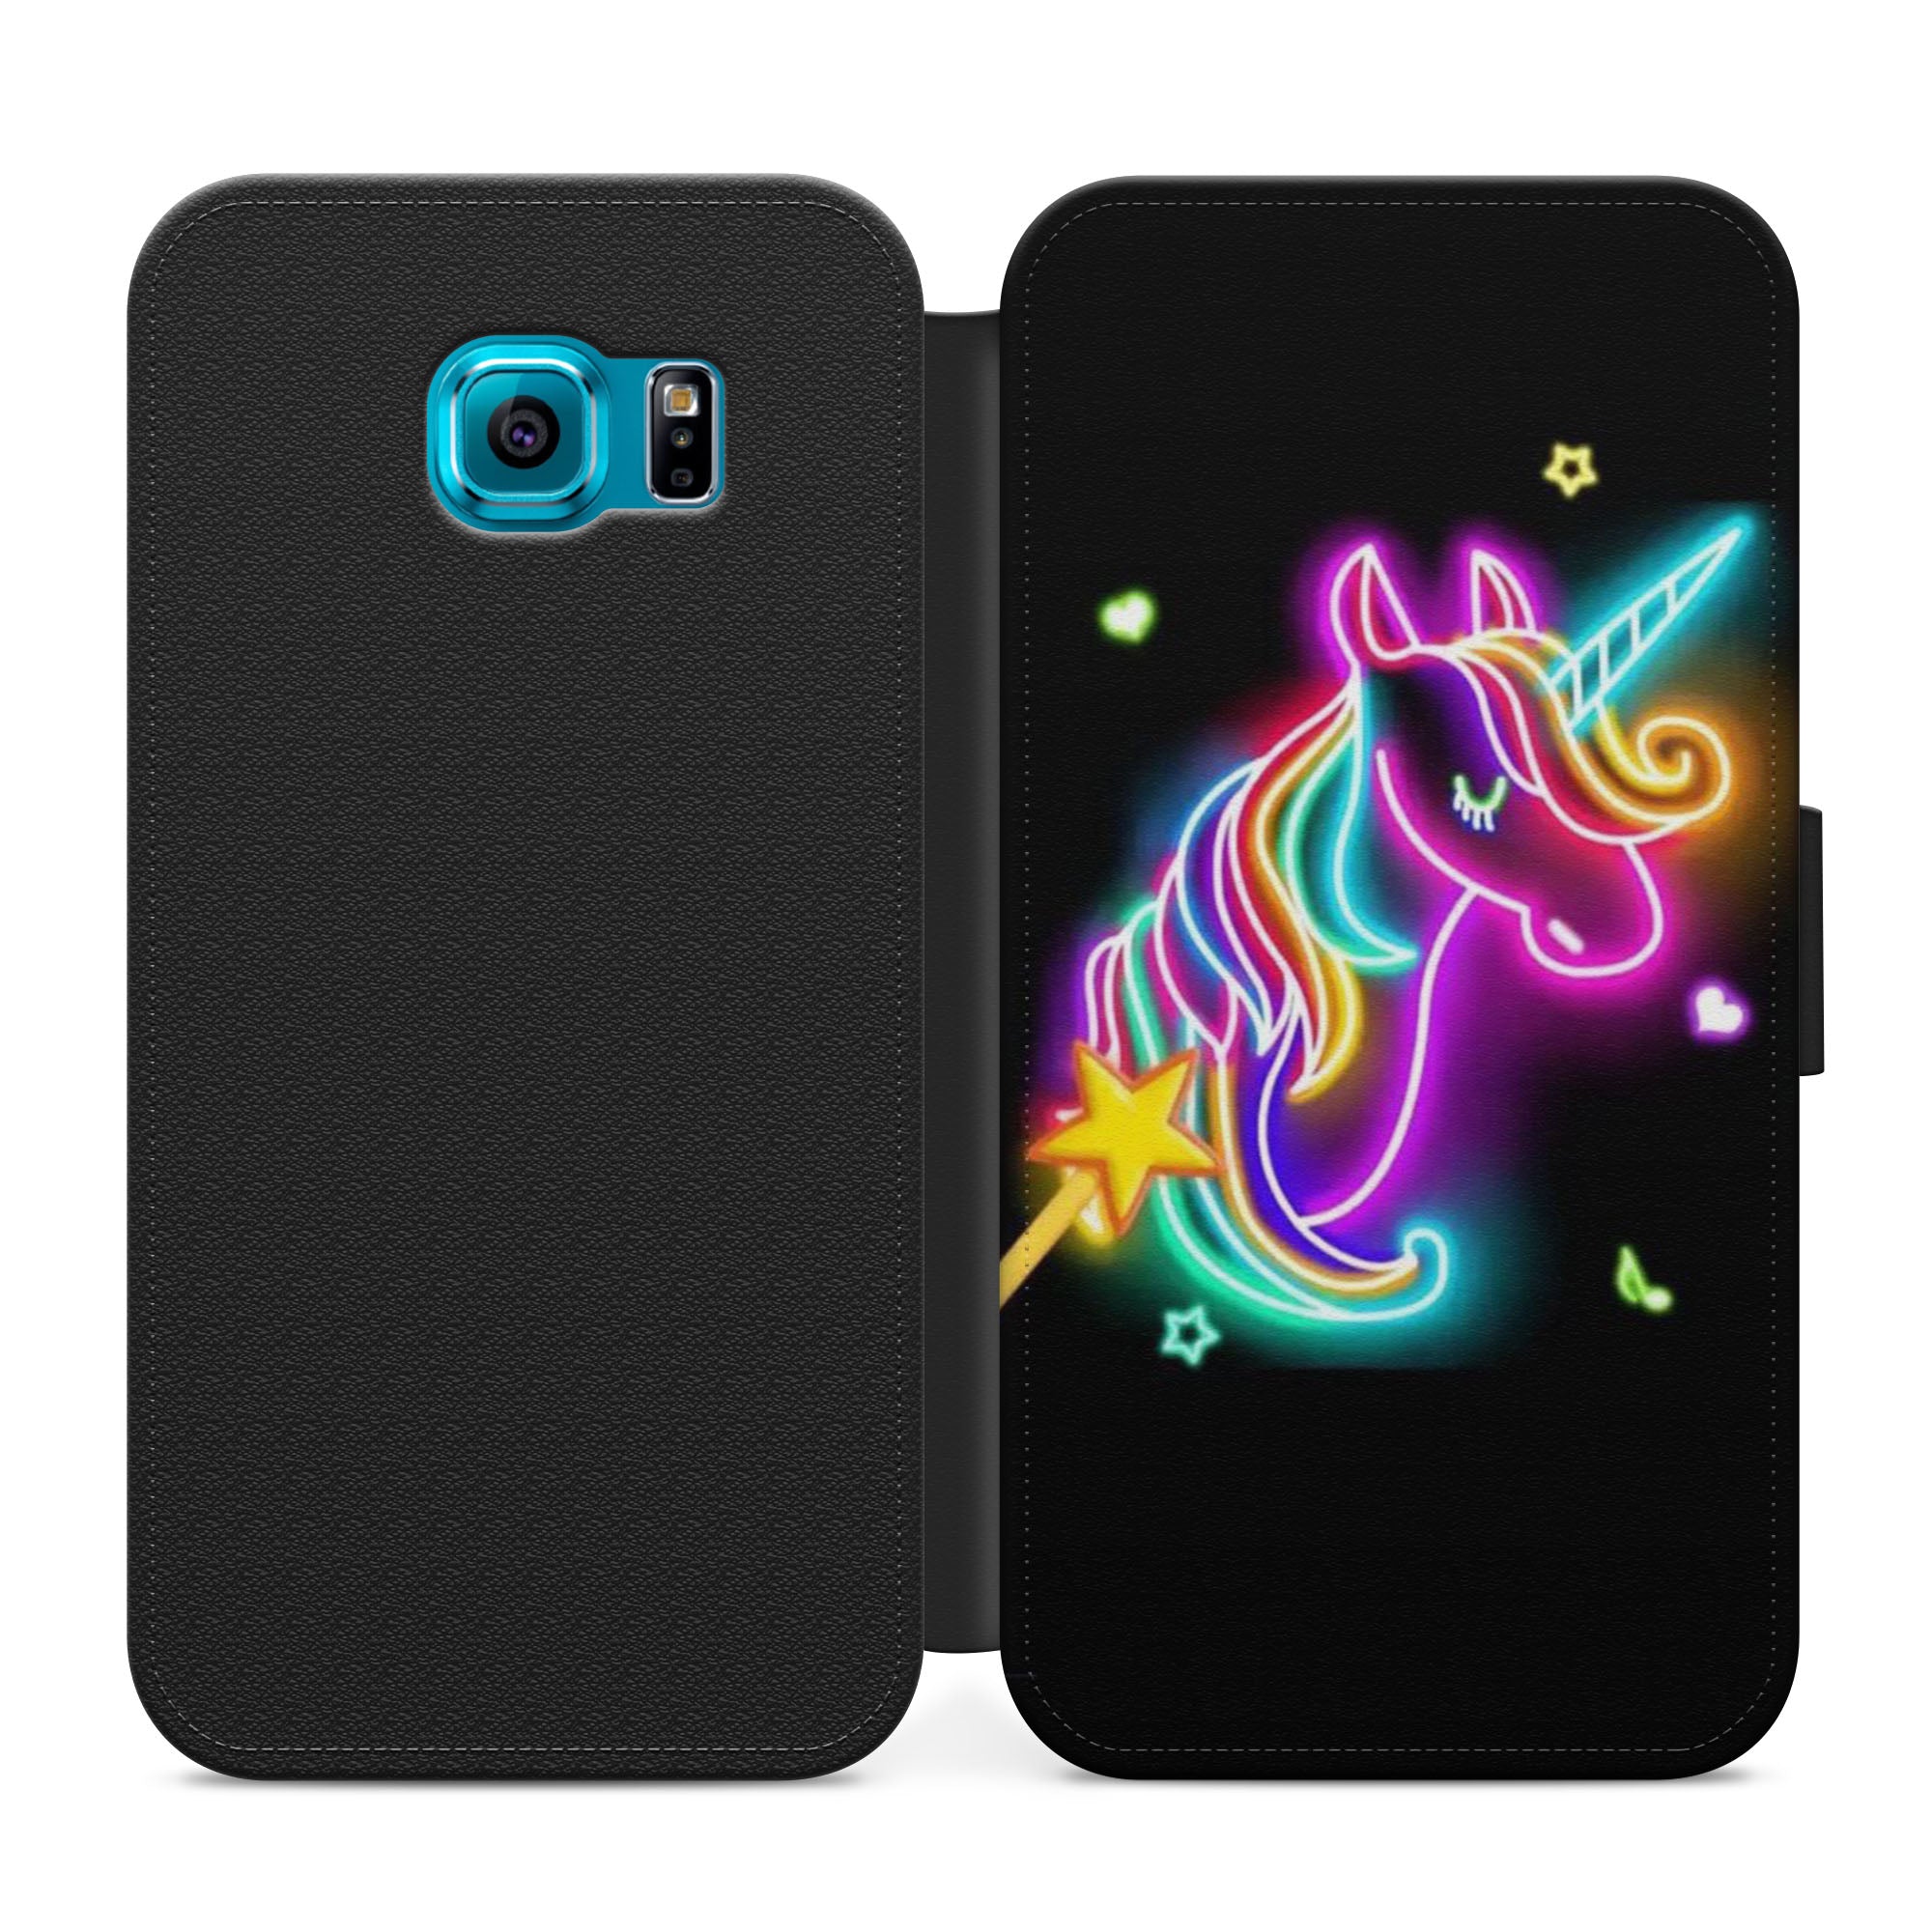 Neon Unicorn Faux Leather Flip Case Wallet for iPhone / Samsung